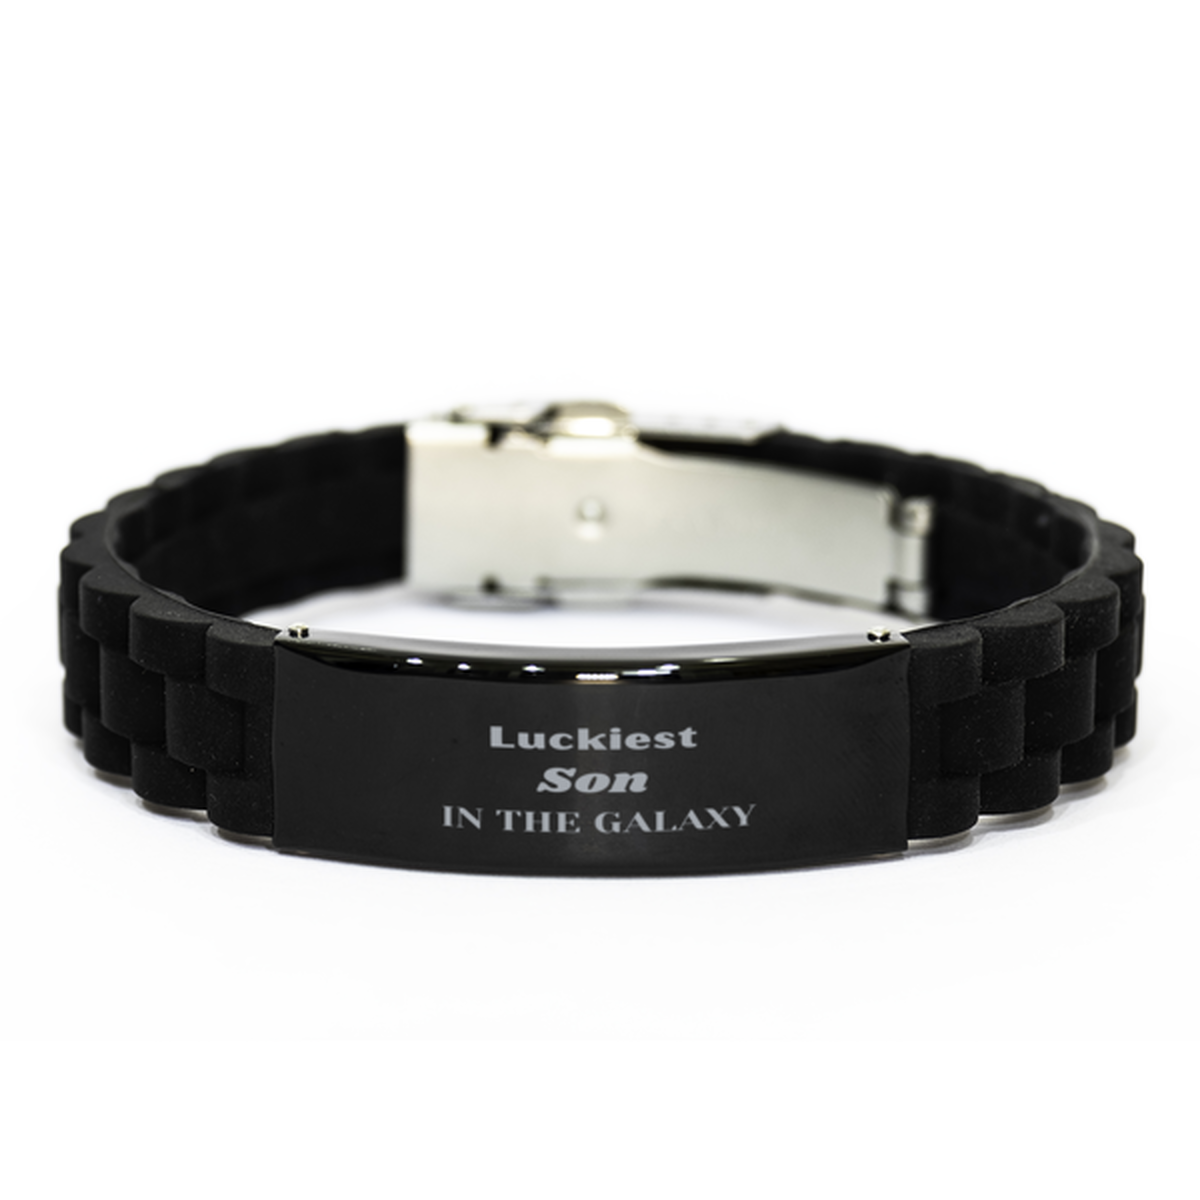 Luckiest Son in the Galaxy, To My Son Engraved Gifts, Christmas Son Black Glidelock Clasp Bracelet Gifts, X-mas Birthday Unique Gifts For Son Men Women